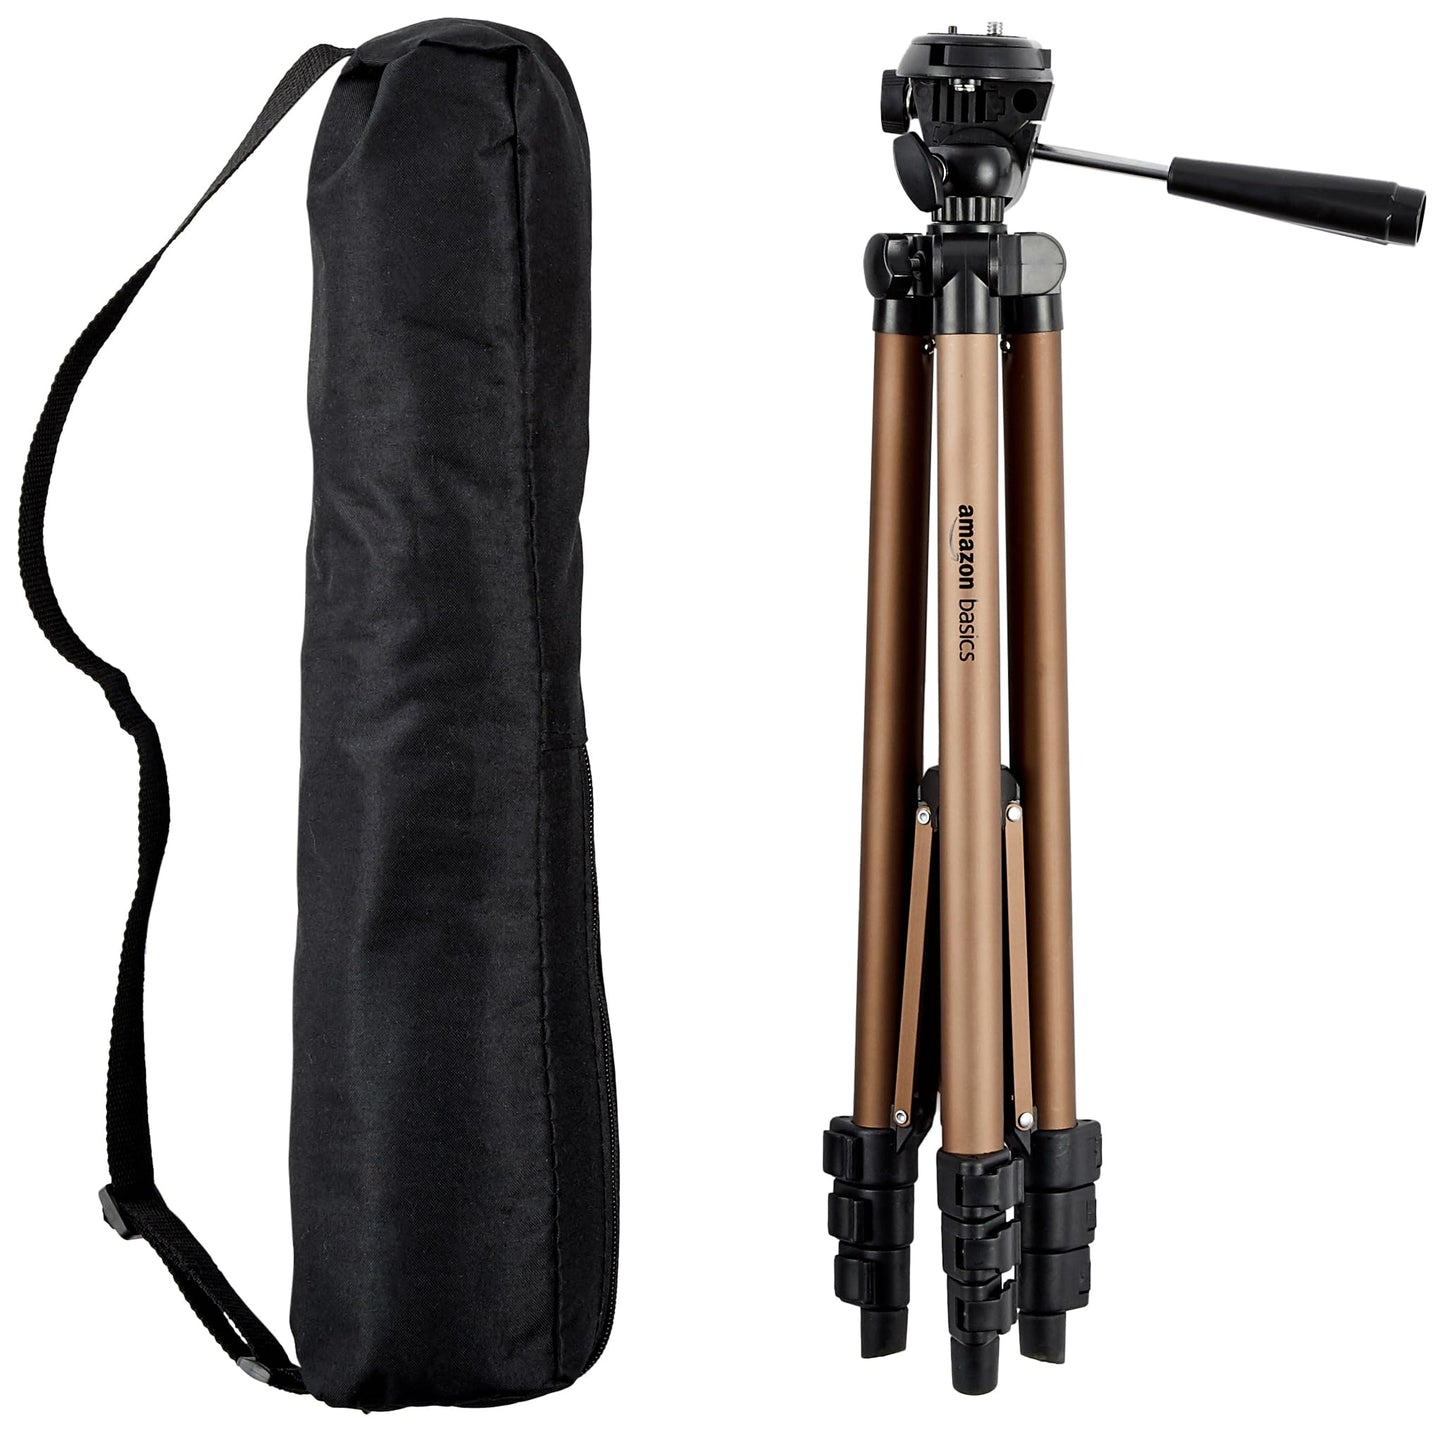 50-inch Lightweight Camera Mount Tripod Stand (Comes with Bag)